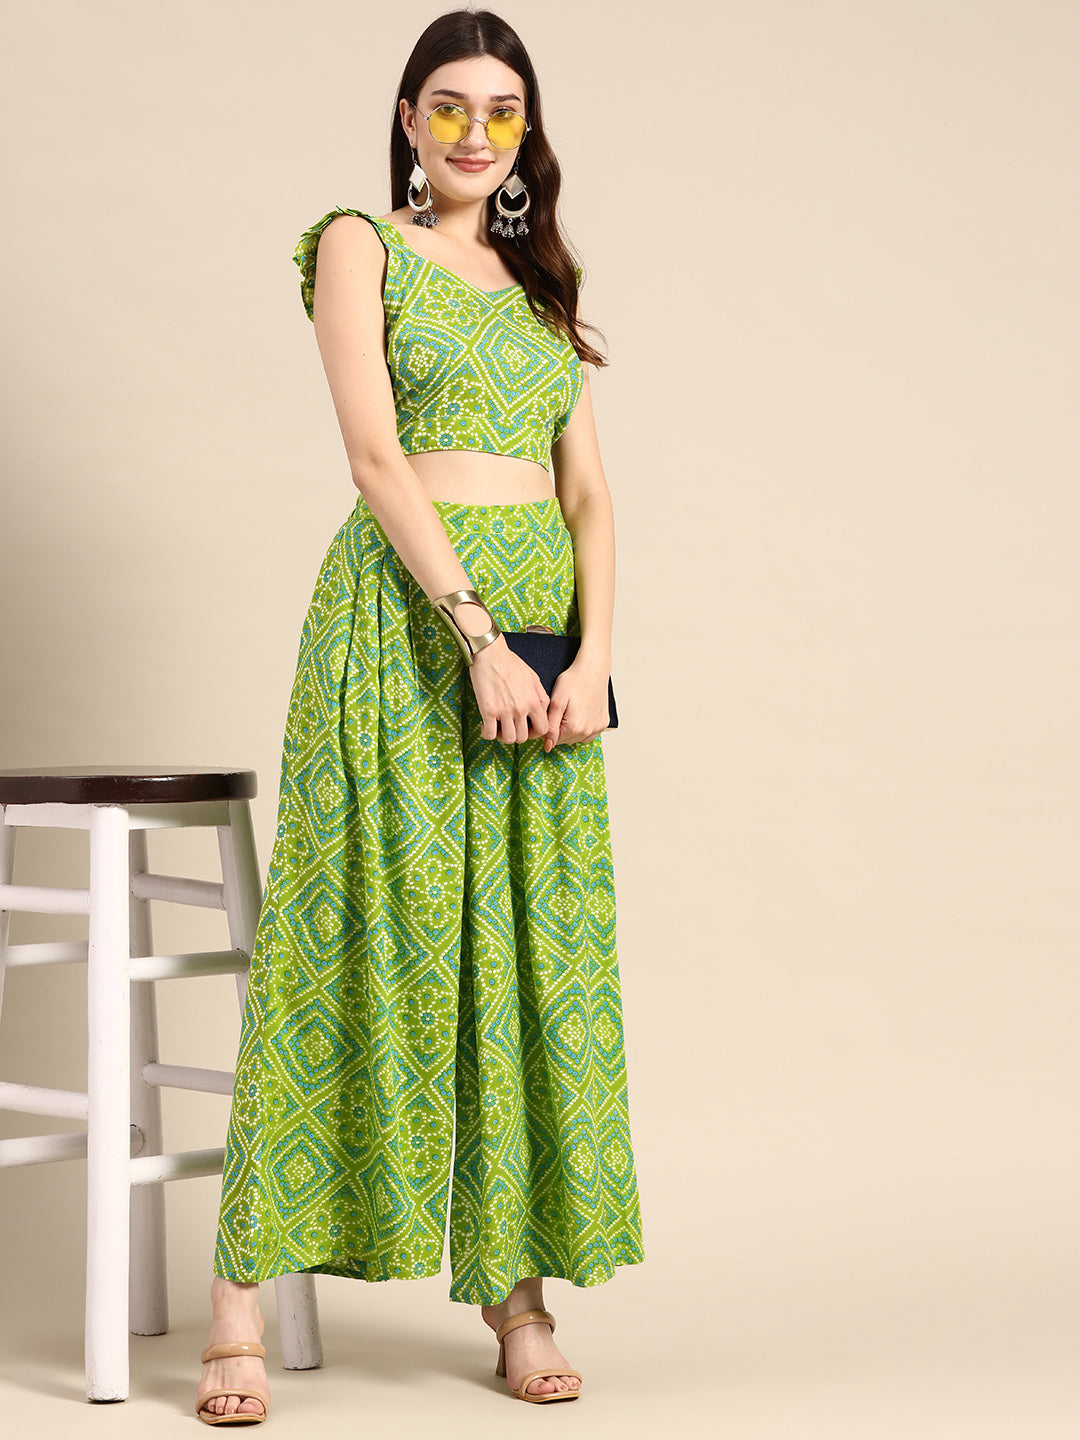 Crop top with back tie and plazzo pants in Lime Green